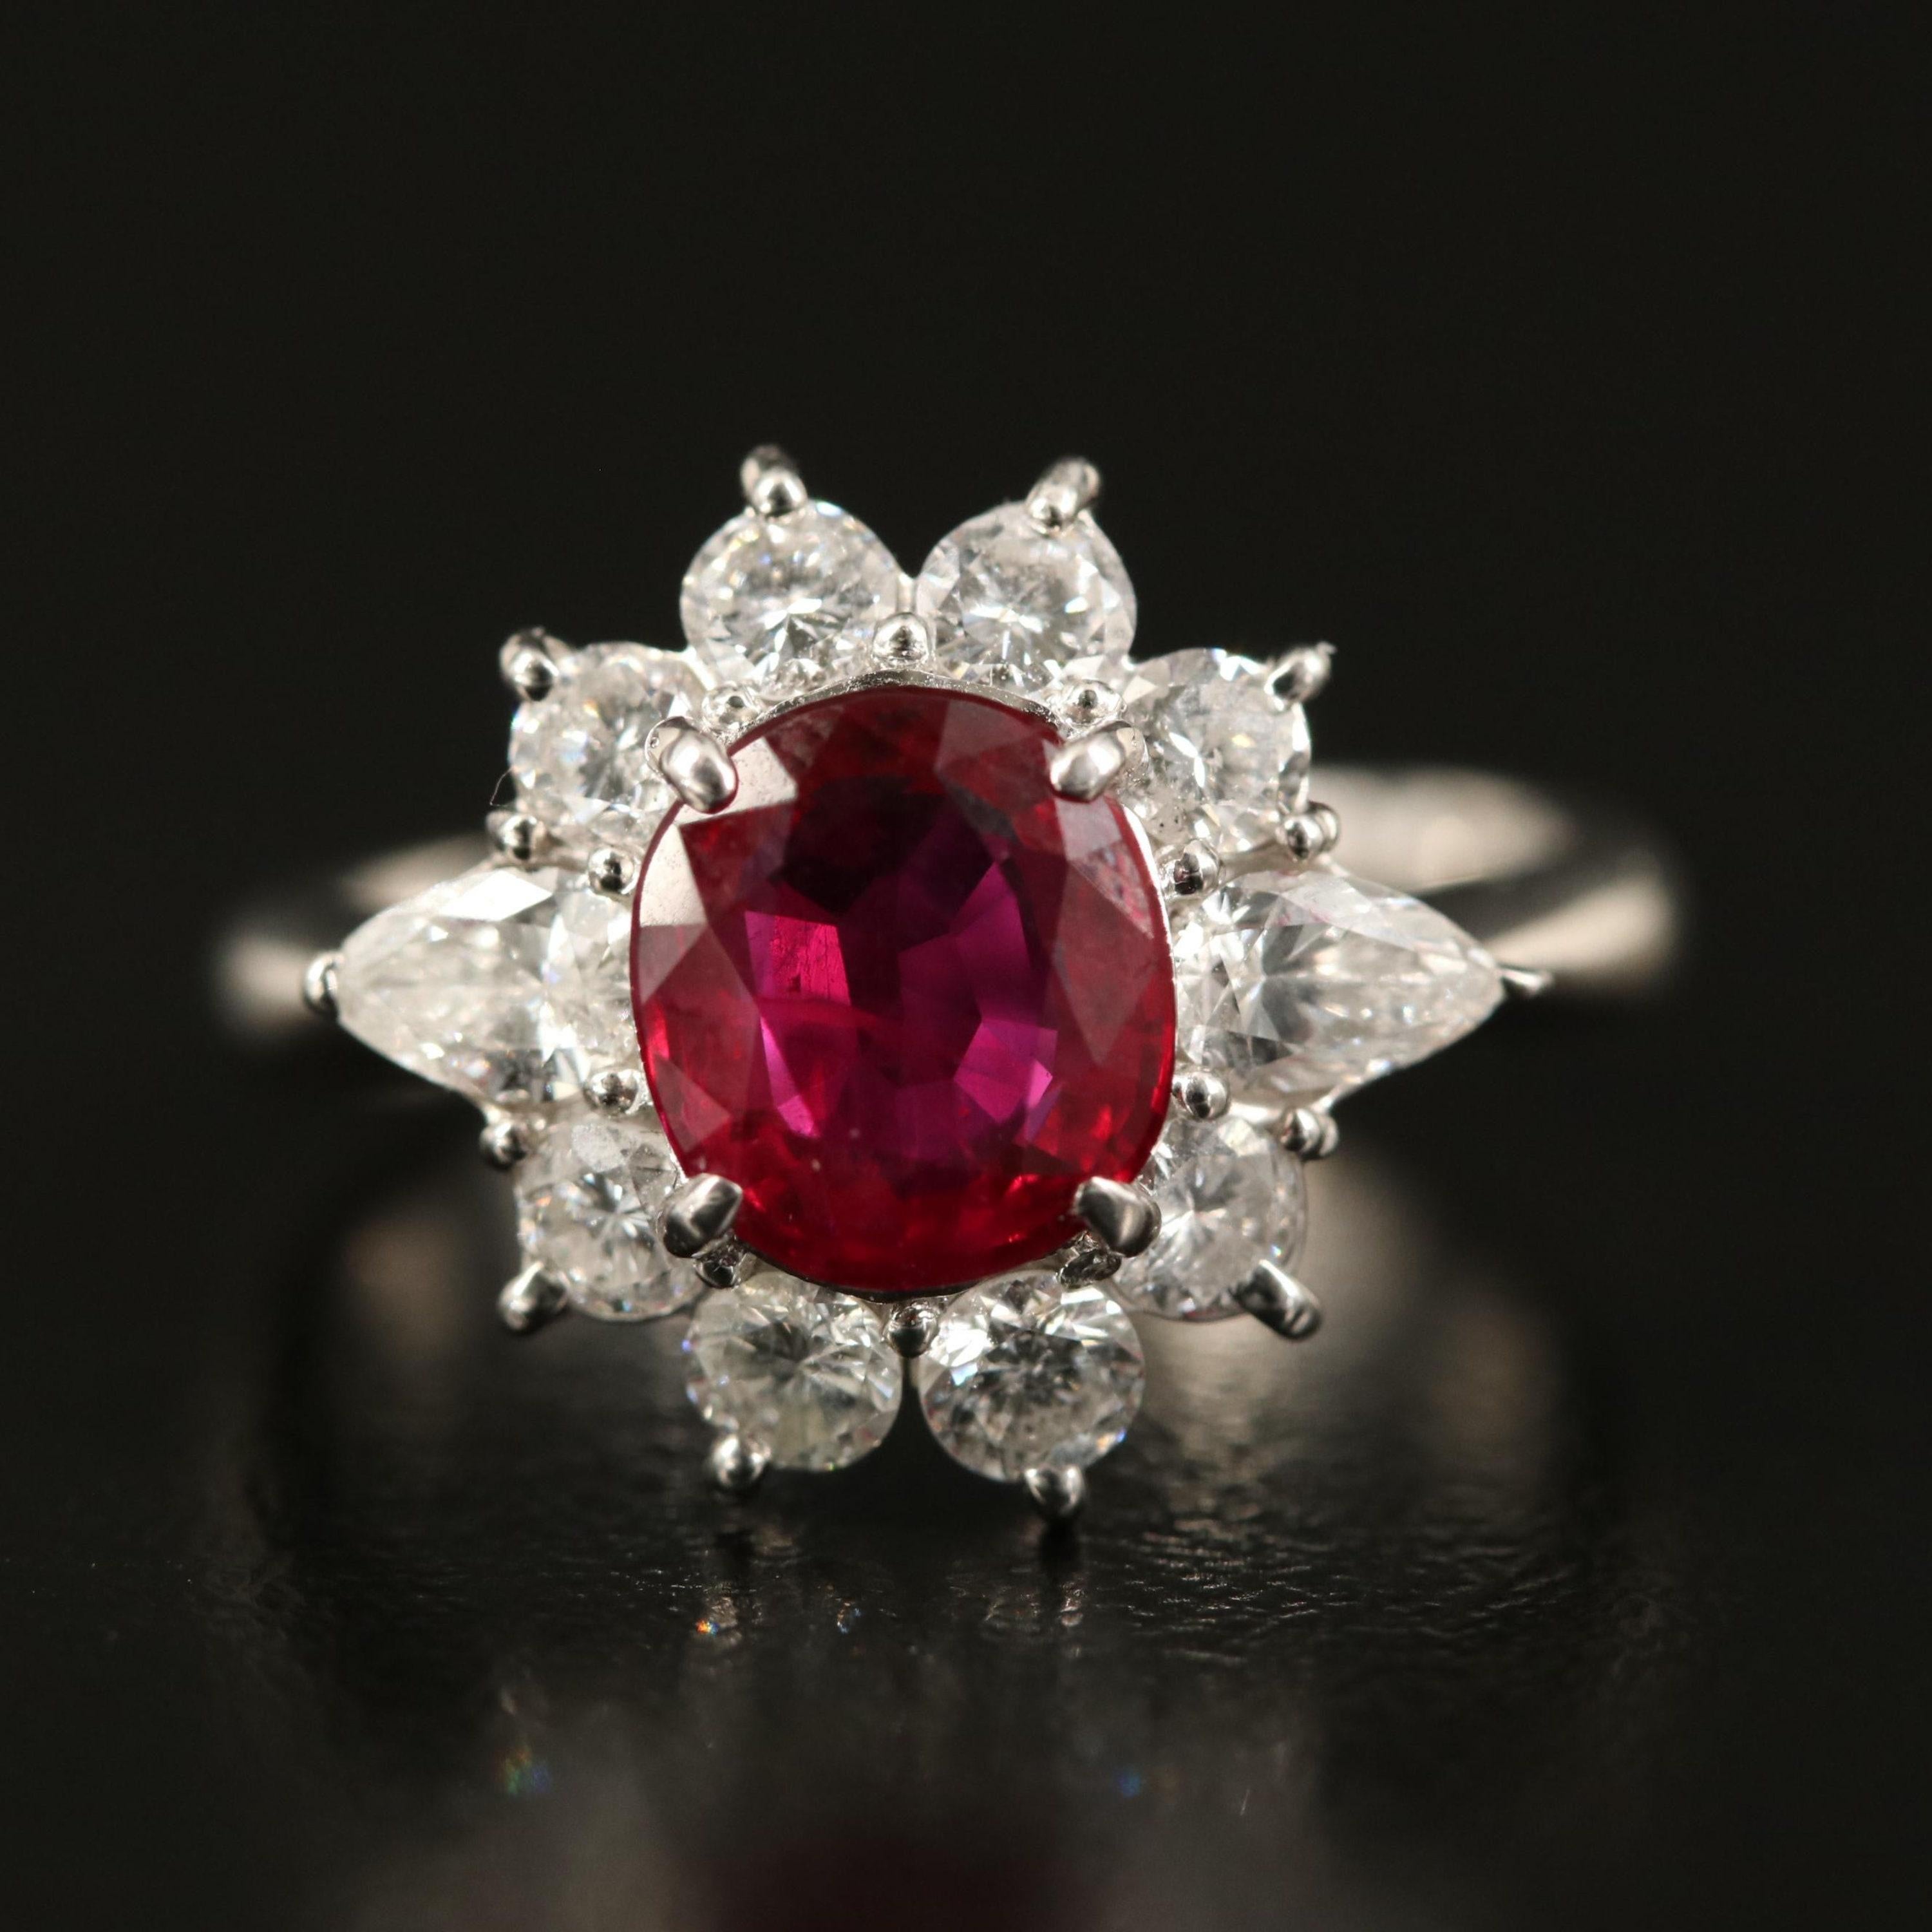 For Sale:  1.6 Carat Antique Floral Ruby Diamond Engagement Ring Gold Ruby Wedding Ring 3